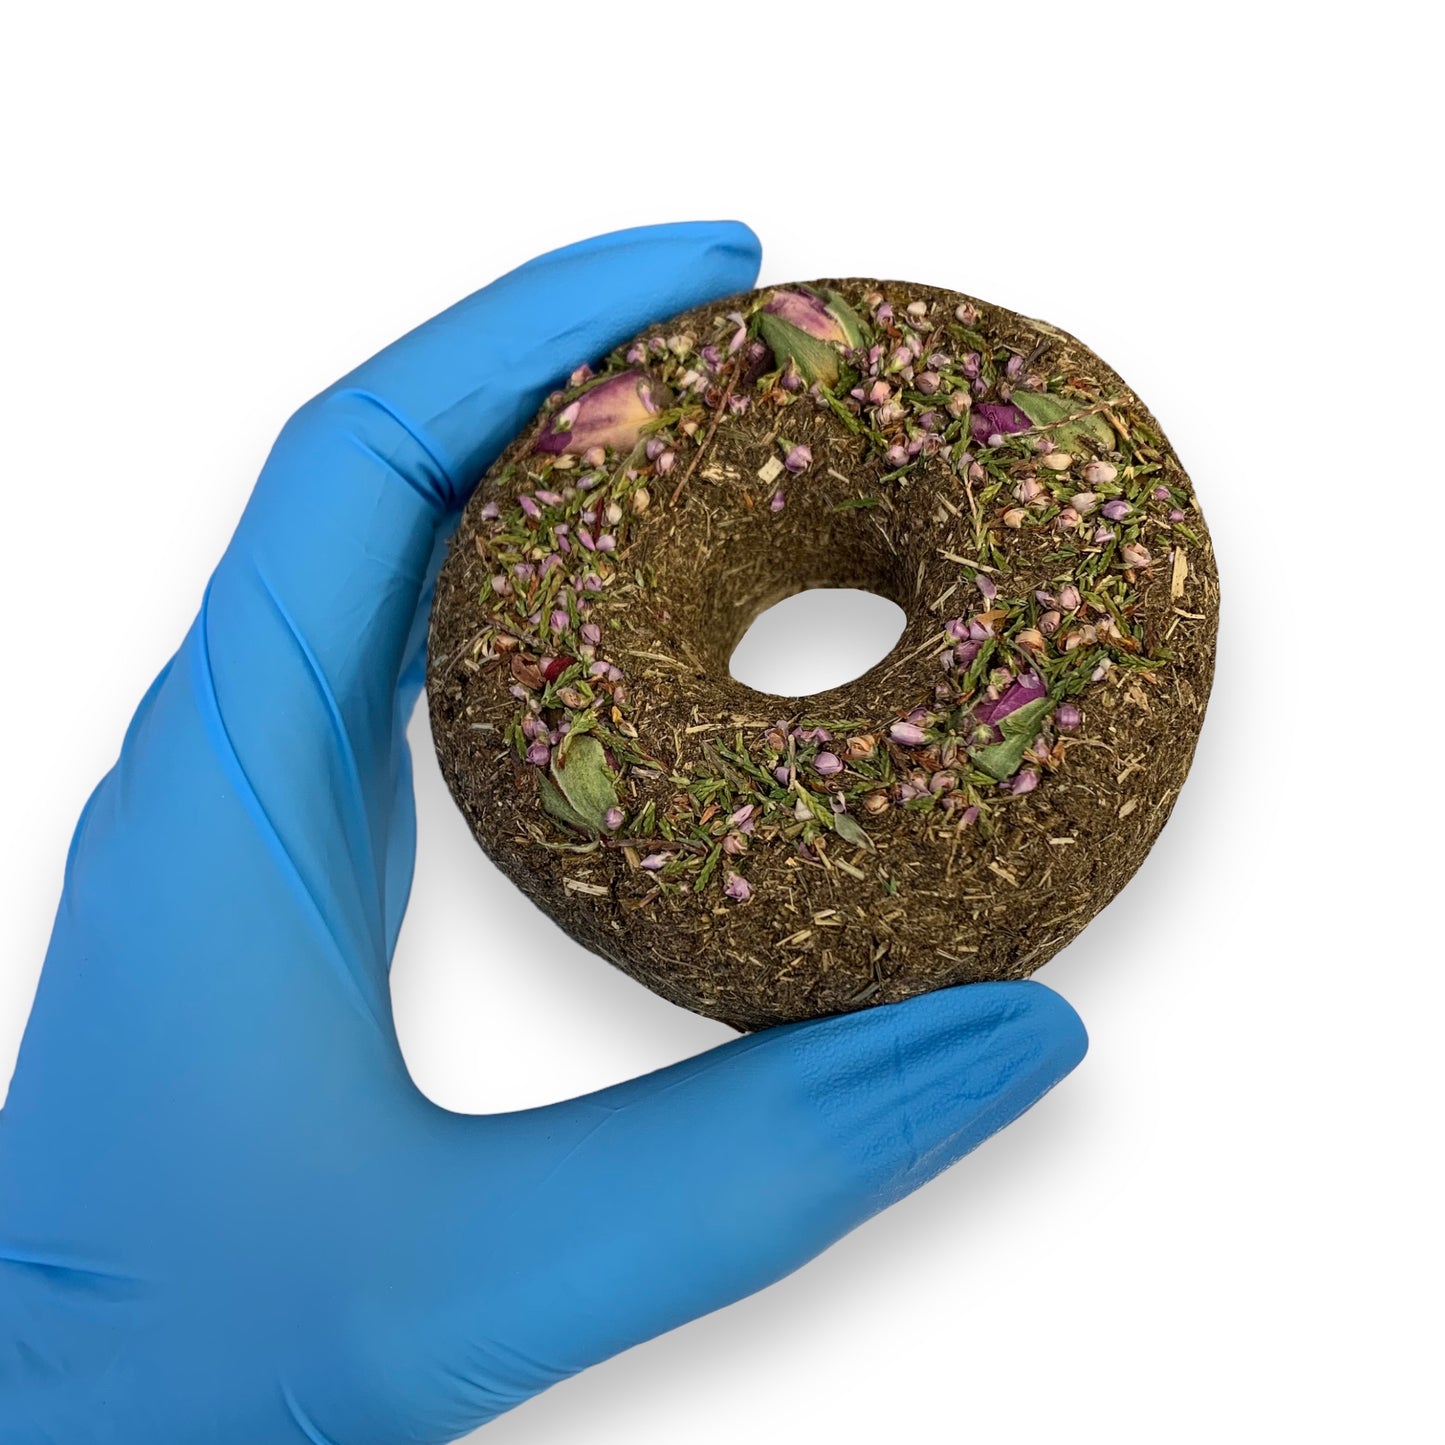 The Botanist's Donuts